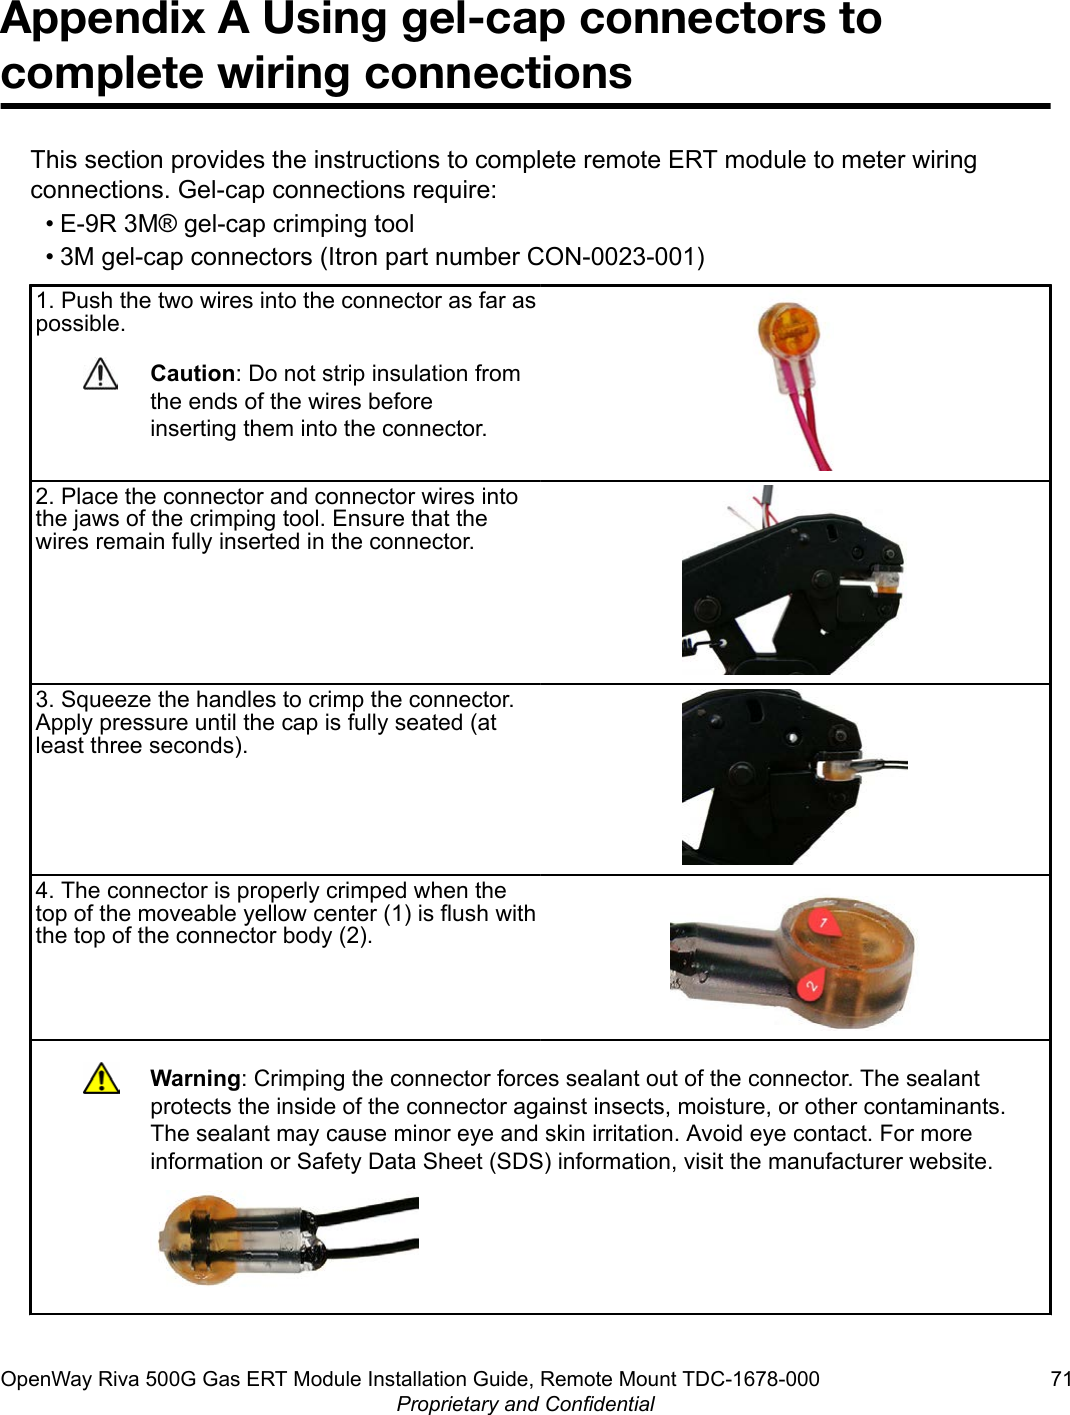 Appendix A Using gel-cap connectors tocomplete wiring connectionsThis section provides the instructions to complete remote ERT module to meter wiringconnections. Gel-cap connections require:• E-9R 3M® gel-cap crimping tool• 3M gel-cap connectors (Itron part number CON-0023-001)1. Push the two wires into the connector as far aspossible.Caution: Do not strip insulation fromthe ends of the wires beforeinserting them into the connector.2. Place the connector and connector wires intothe jaws of the crimping tool. Ensure that thewires remain fully inserted in the connector.3. Squeeze the handles to crimp the connector.Apply pressure until the cap is fully seated (atleast three seconds).4. The connector is properly crimped when thetop of the moveable yellow center (1) is flush withthe top of the connector body (2).Warning: Crimping the connector forces sealant out of the connector. The sealantprotects the inside of the connector against insects, moisture, or other contaminants.The sealant may cause minor eye and skin irritation. Avoid eye contact. For moreinformation or Safety Data Sheet (SDS) information, visit the manufacturer website.OpenWay Riva 500G Gas ERT Module Installation Guide, Remote Mount TDC-1678-000 71Proprietary and Confidential